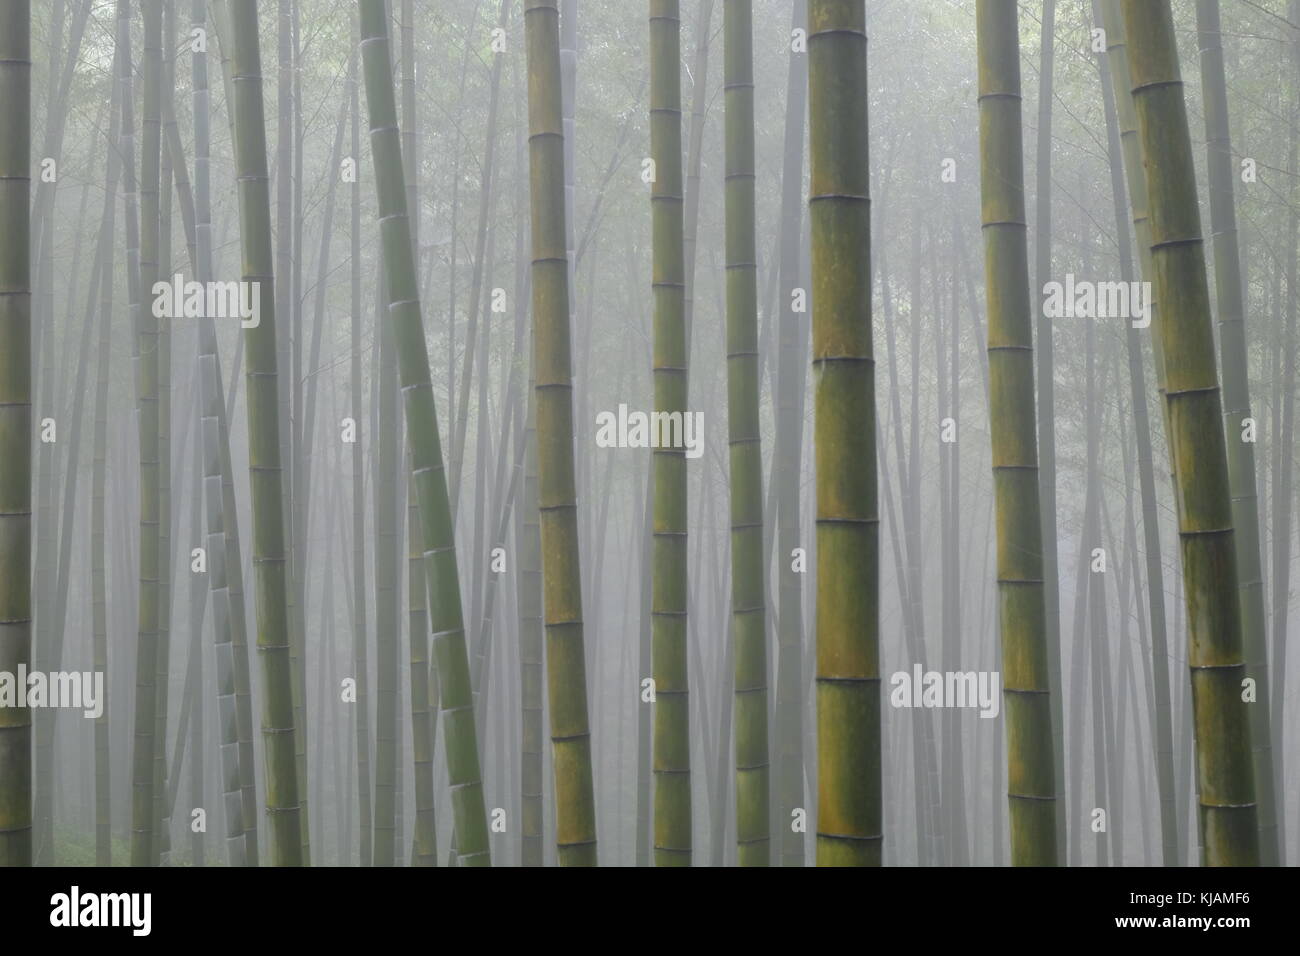 Foggy landscape pictures at the Shunan Bamboo Forest in China, Sichuan province. Stock Photo